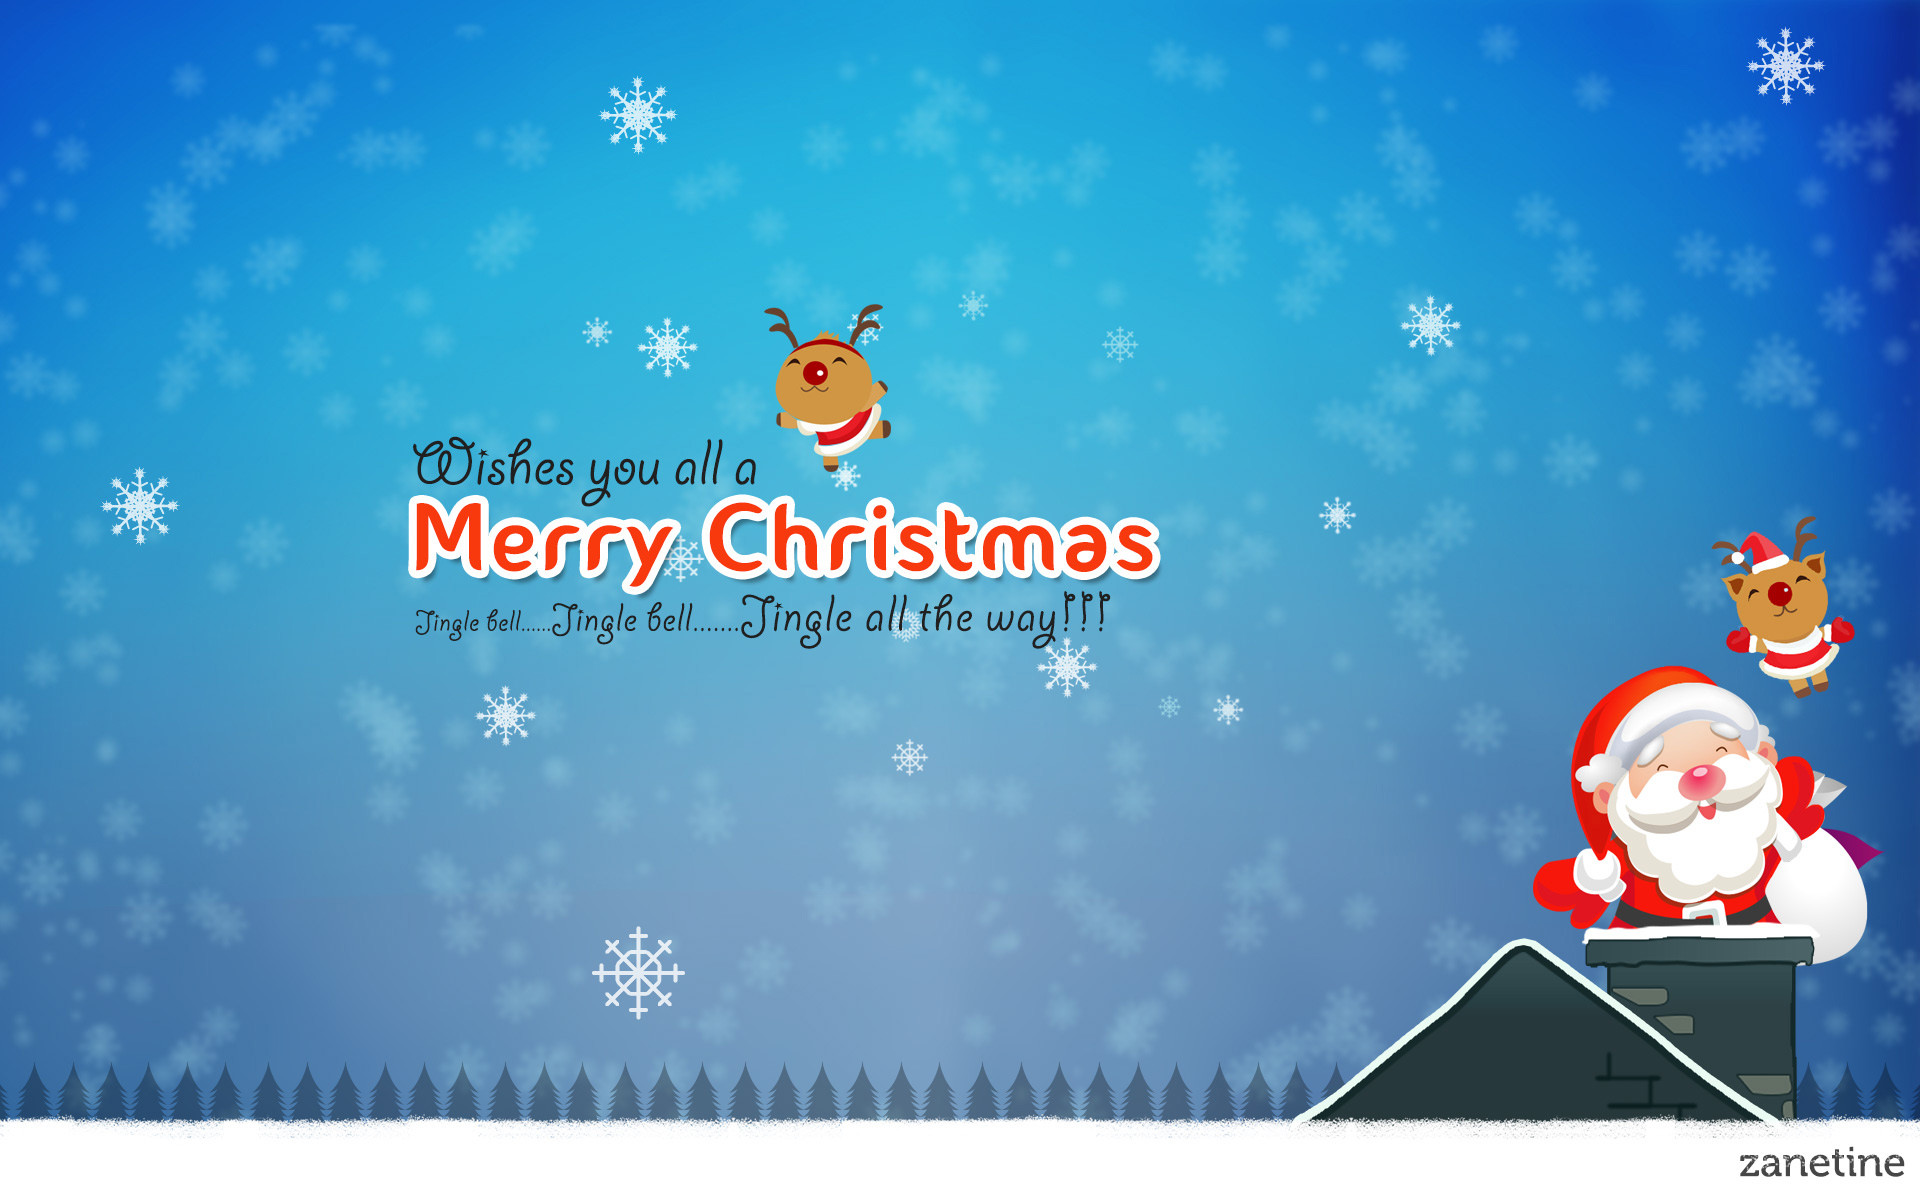 1920x1200 wish-you-all-a-merry-christmas